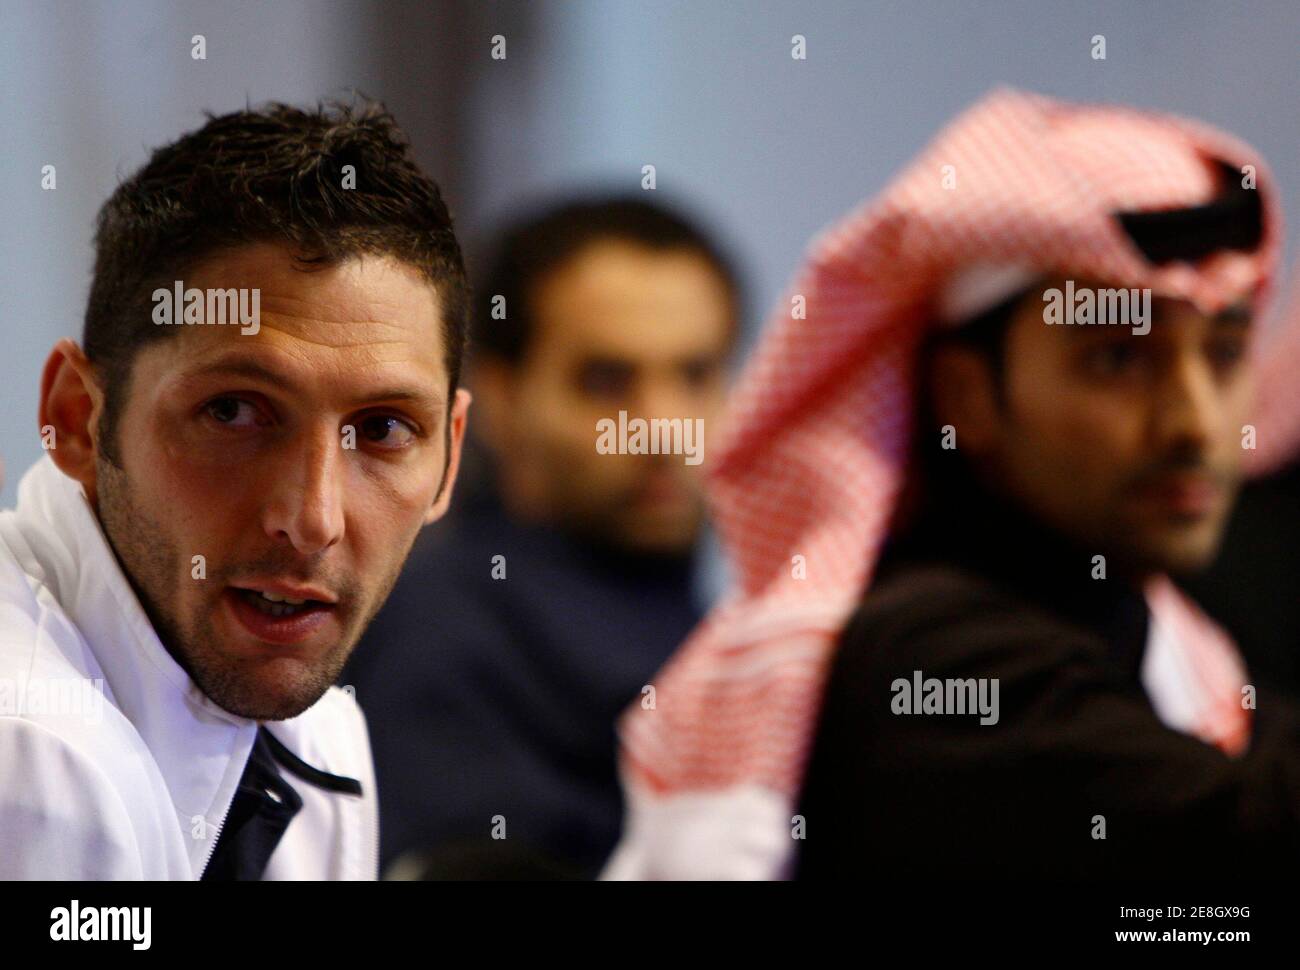 Inter Milan's Marco Materazzi (L) attends a news conference after their match with Al Hilal at King Fahd International Stadium in Riyadh January 2, 2010. Inter Milan are in Riyadh to play against Saudi club Al Hilal in a testimonial match in honour of veteran Saudi soccer player Nawaf Al-Temyat.  REUTERS/Fahad Shadeed      (SAUDI ARABIA - Tags: SPORT SOCCER) Stock Photo